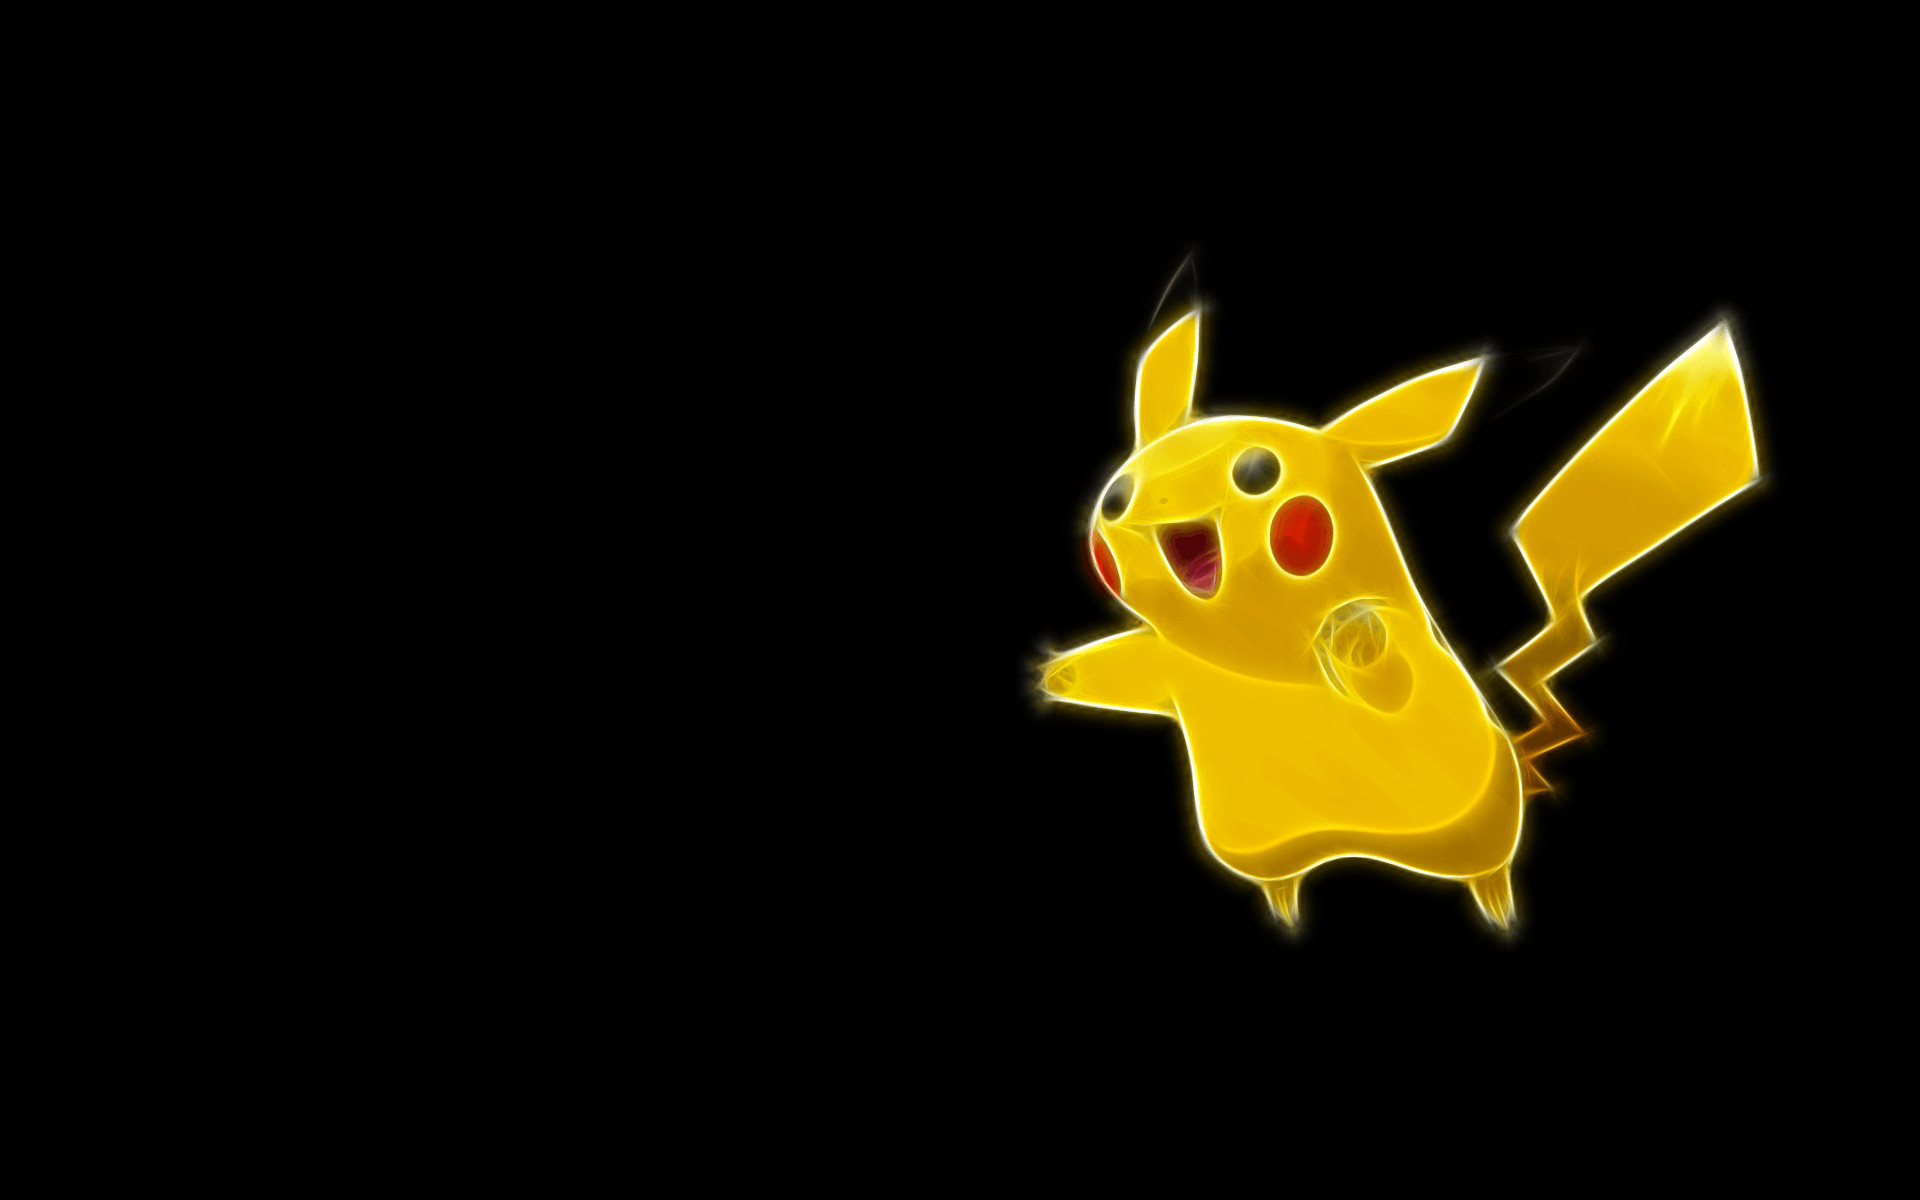 Related Pictures Pokemon Pikachu Wallpapers Pikachu Wallpapers